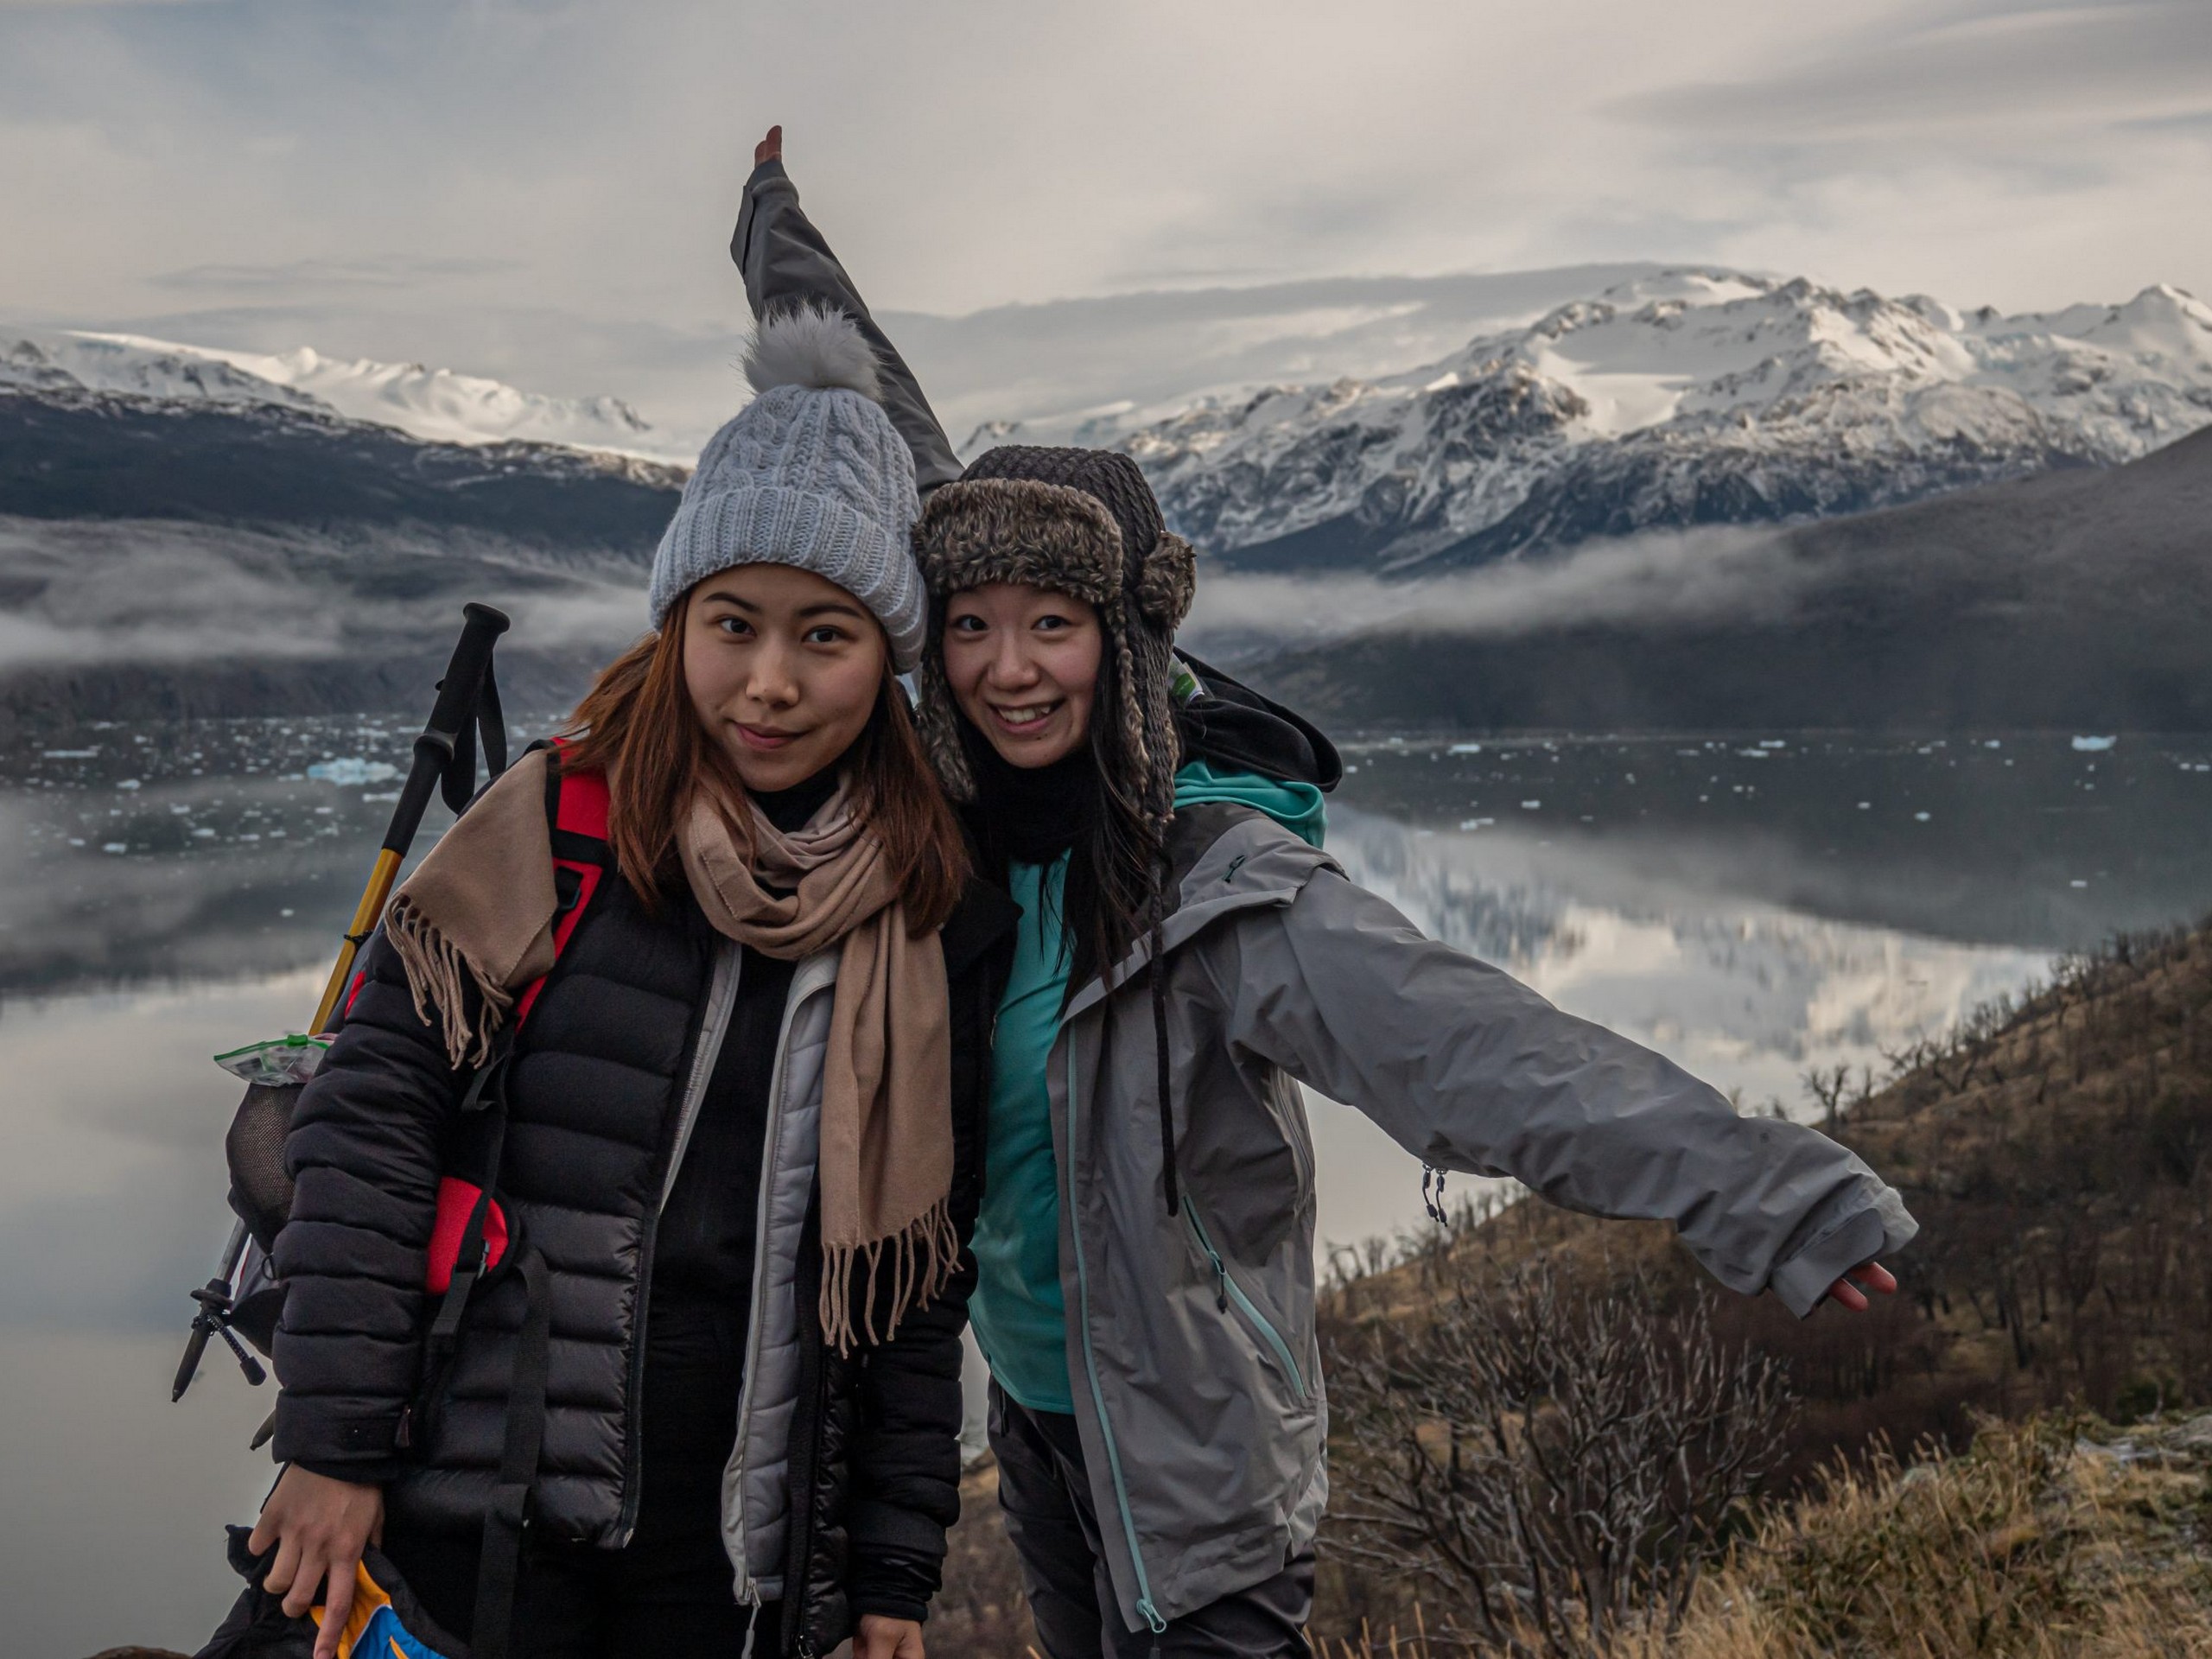 Two girls posing in front of the stunning scenery in Patagonia